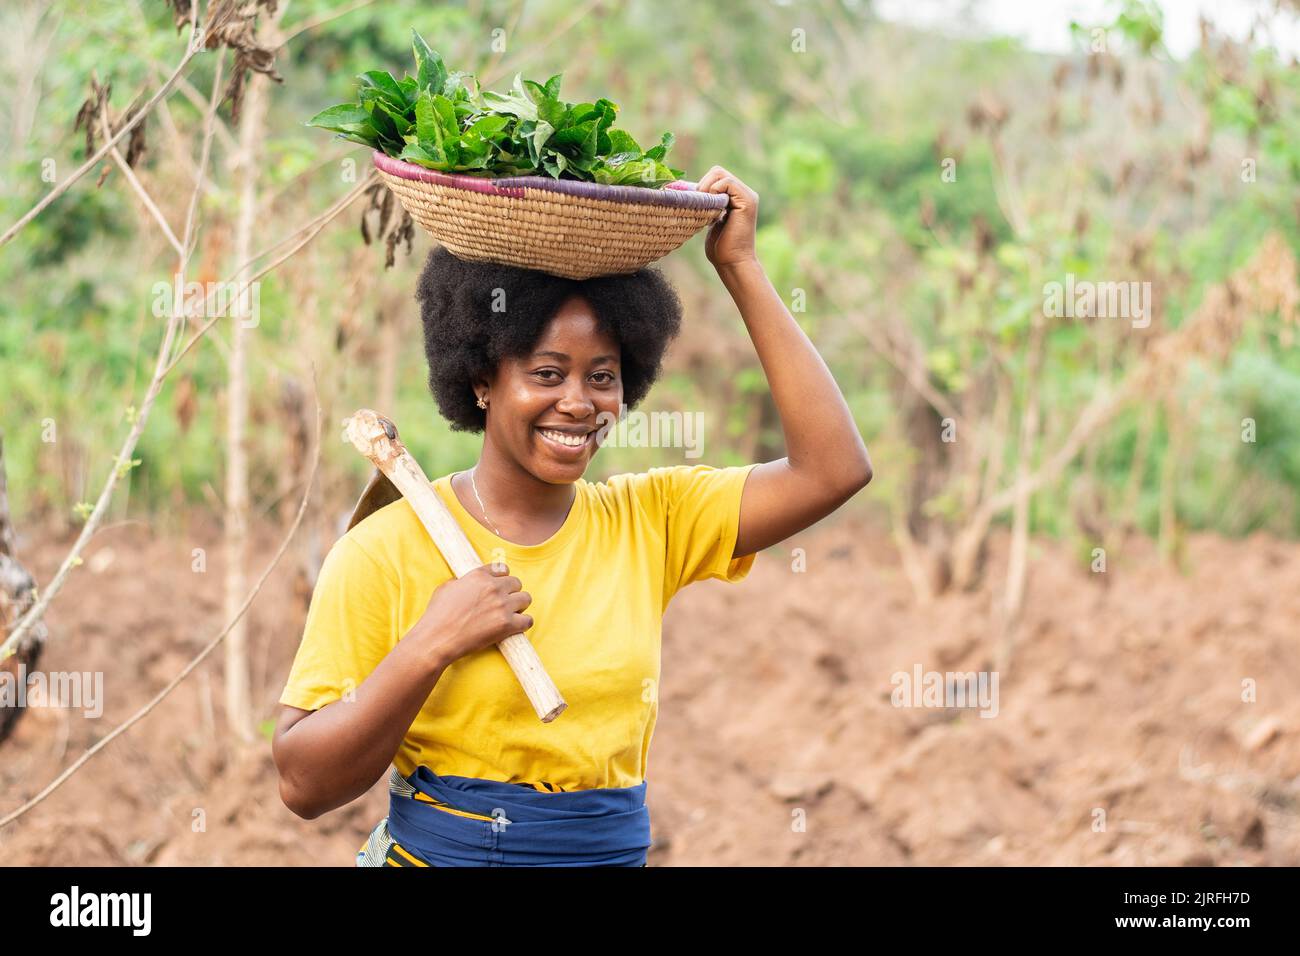 african farmer carrying vegetables and a hoe Stock Photo